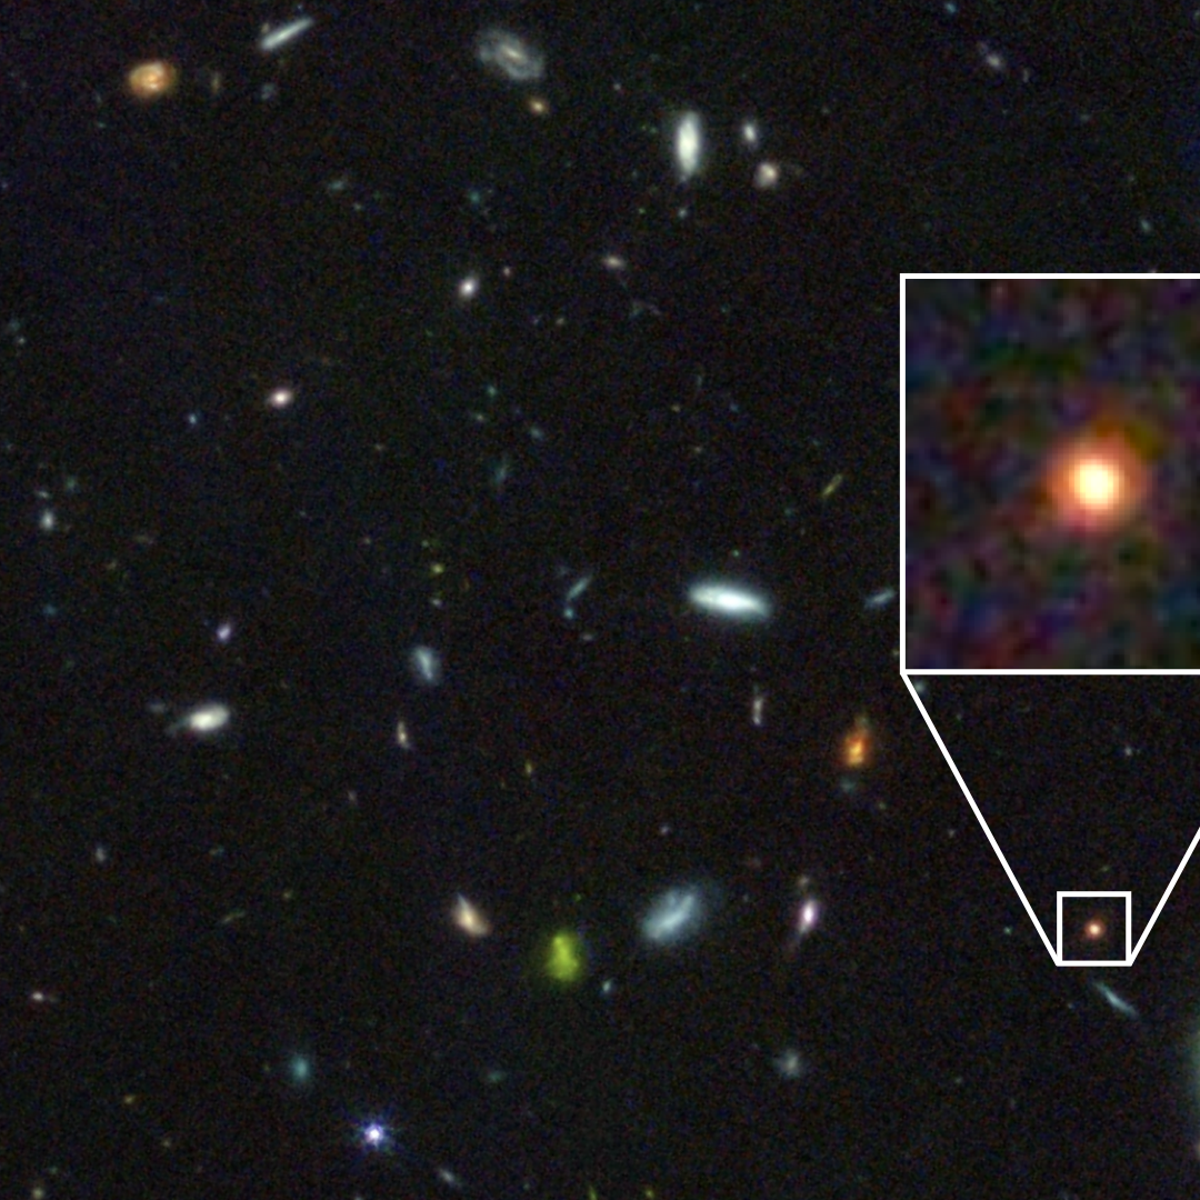 Ancient galaxy discovered 25 billion years away using most powerful space telescope ever built | The Independent